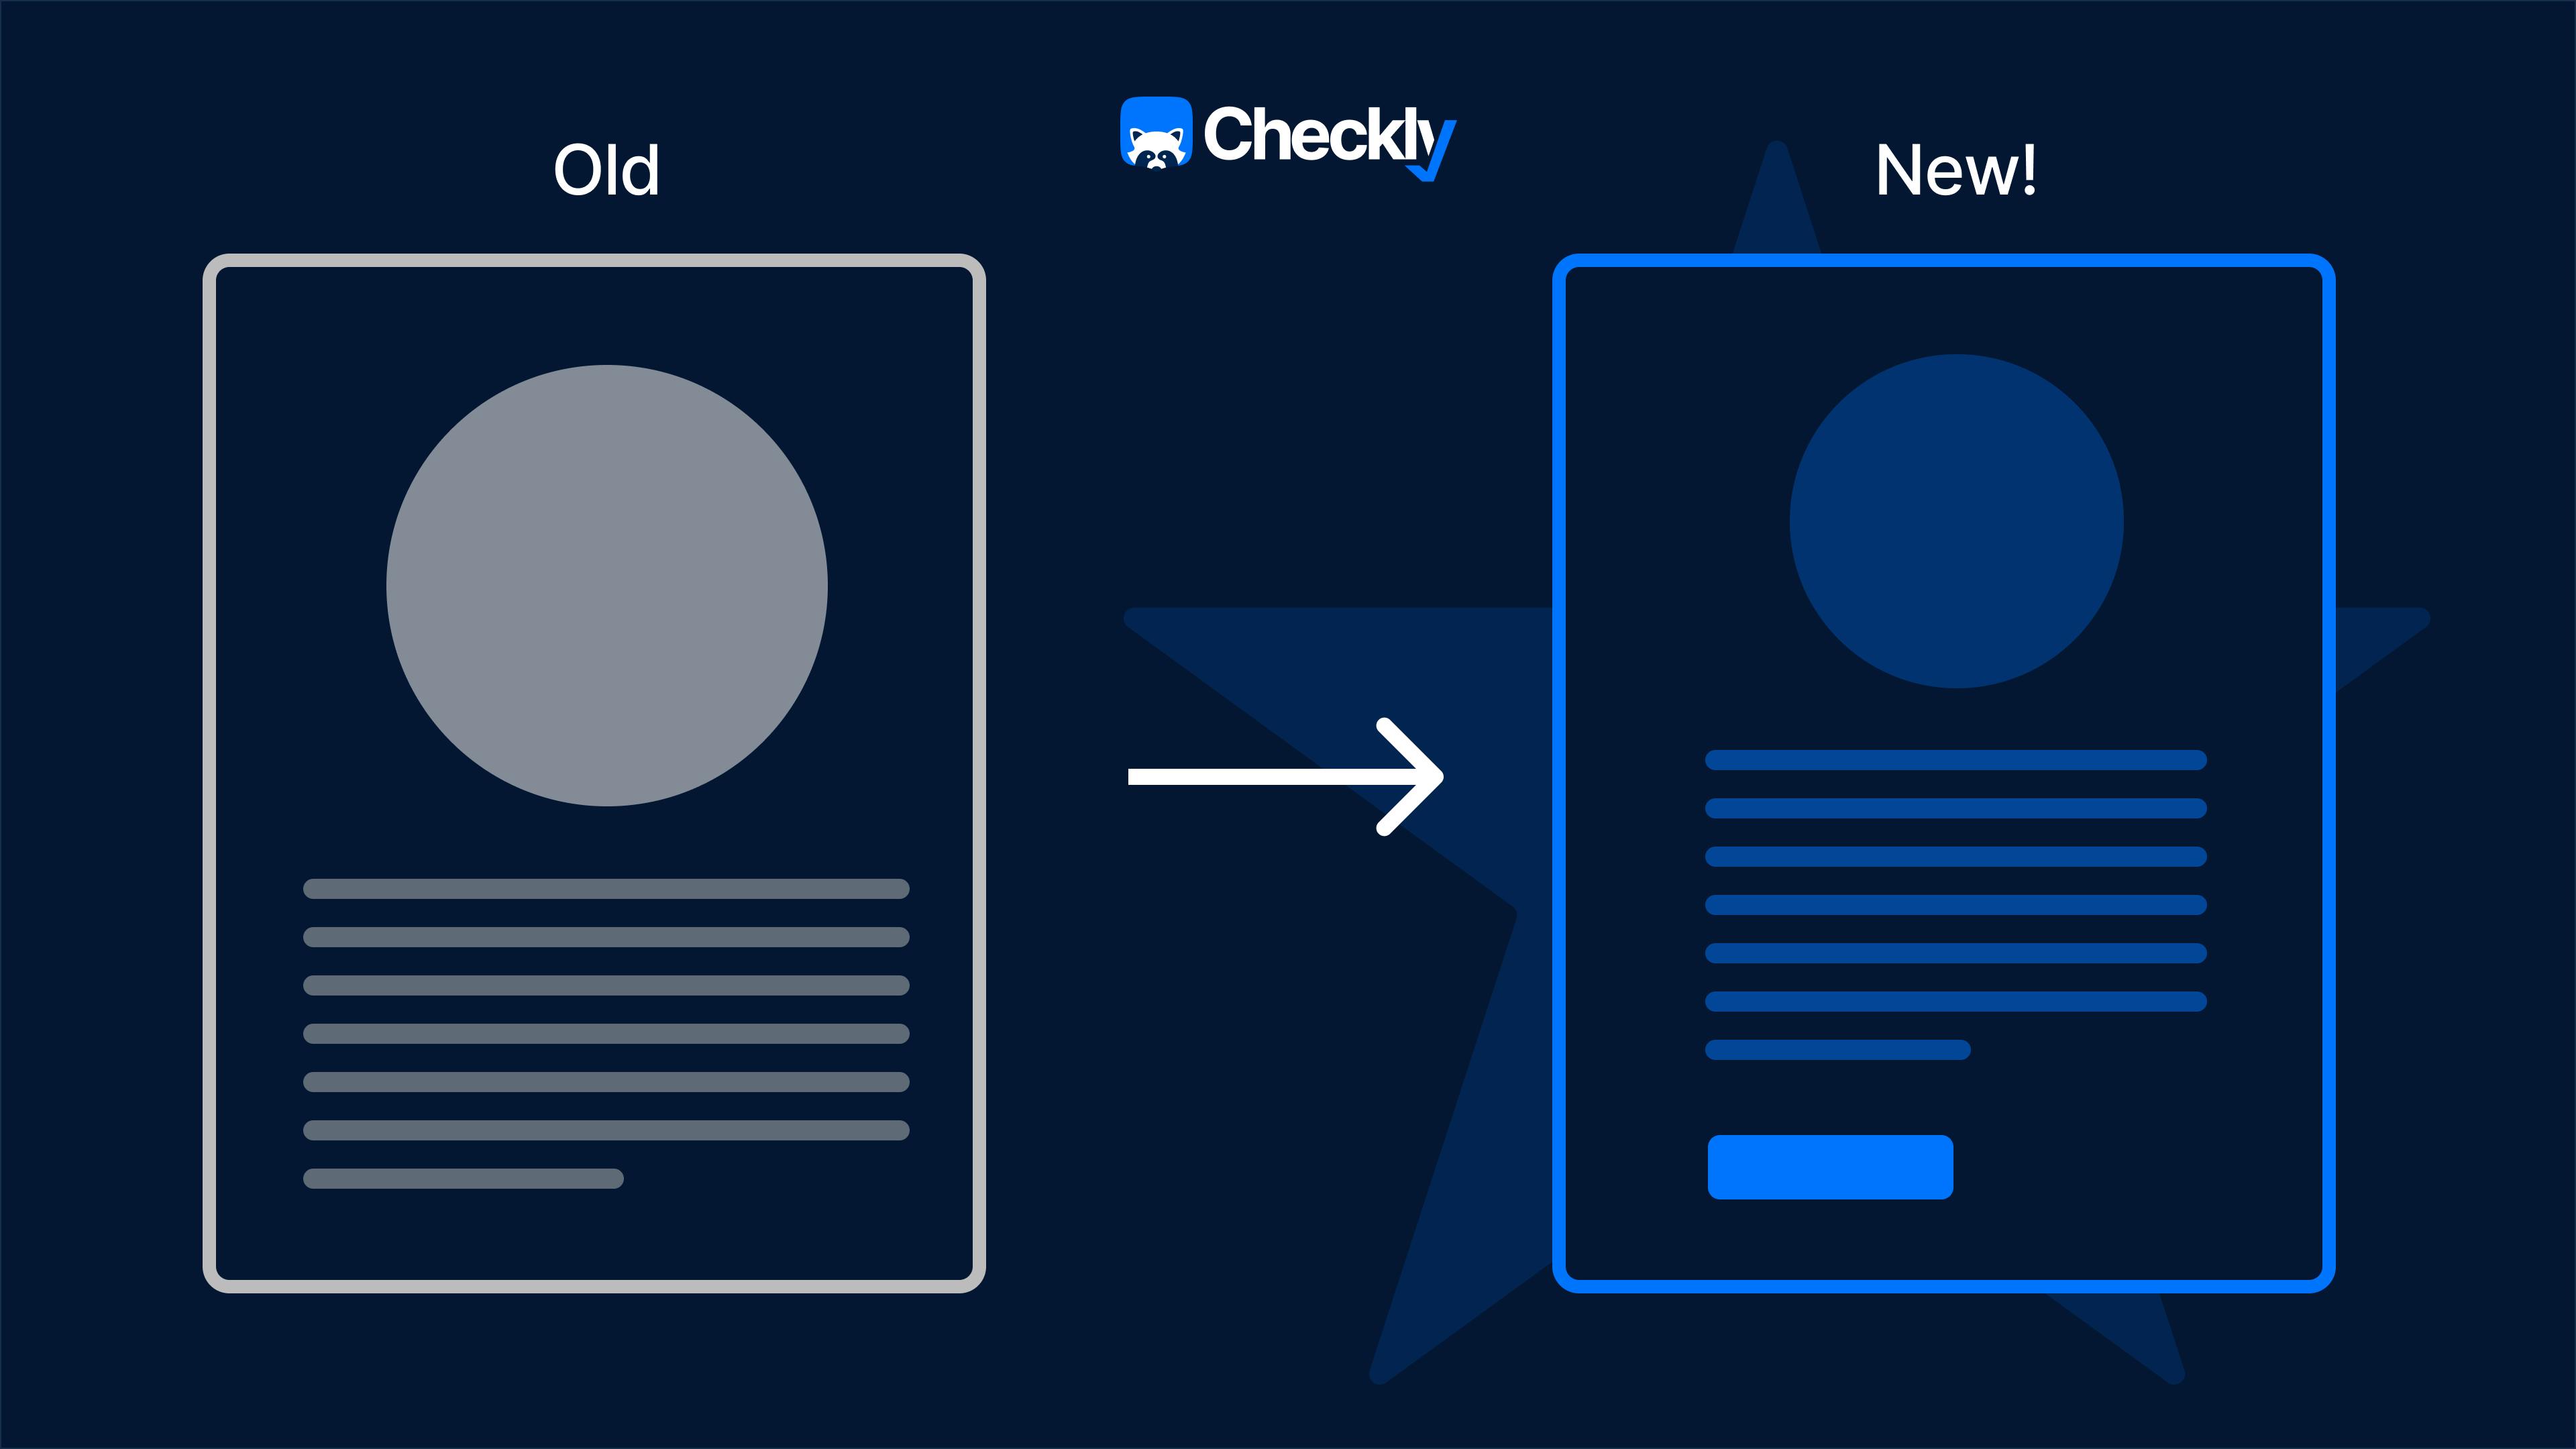 Illustration representing a change after visual regression testing is performed, assuming it detected a missing button on a web page